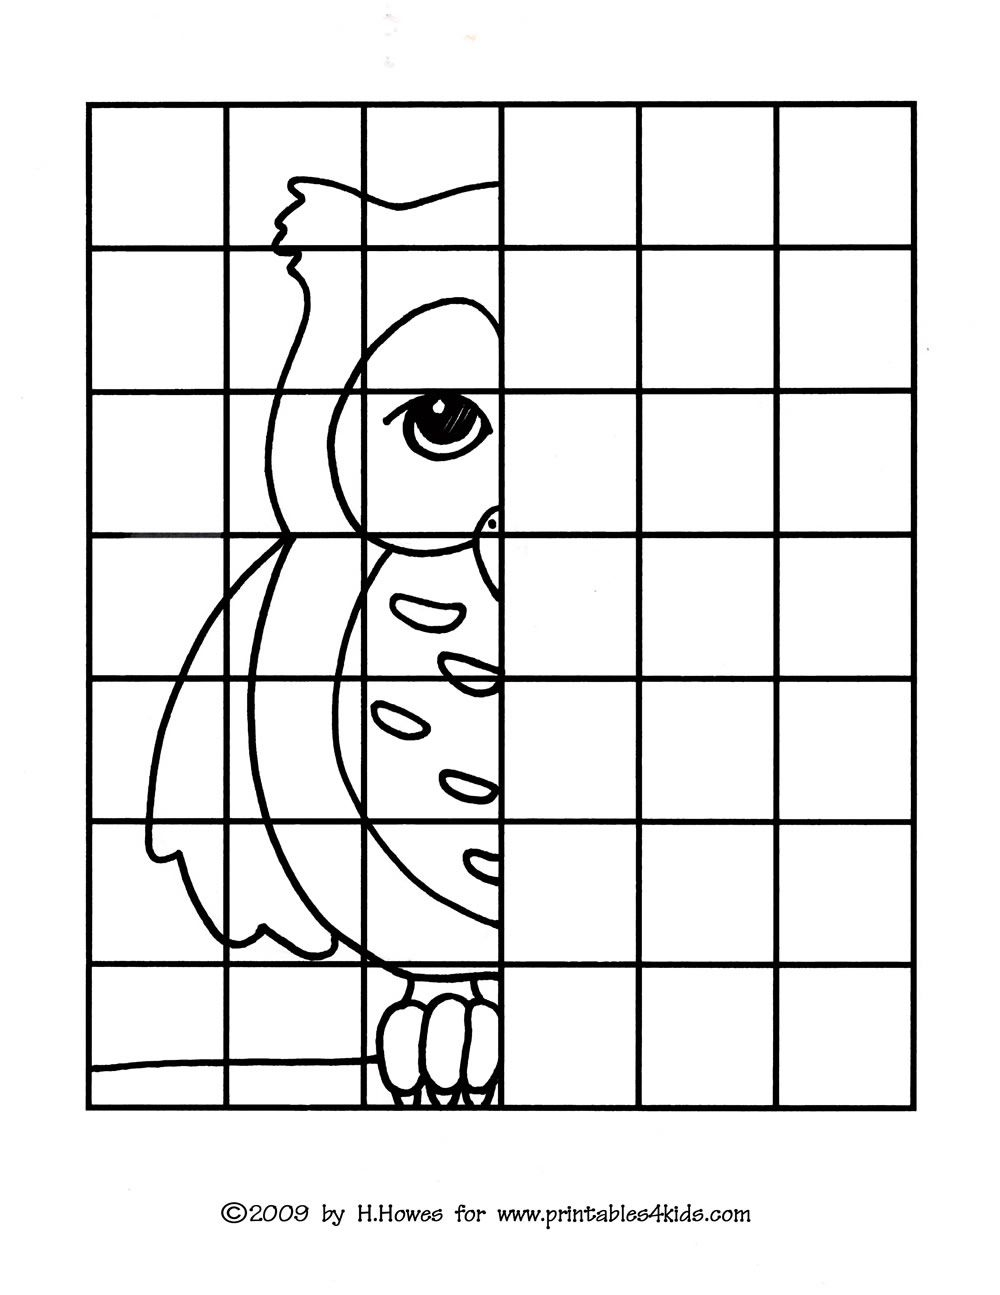 Owl Complete The Picture Drawing : Printables For Kids